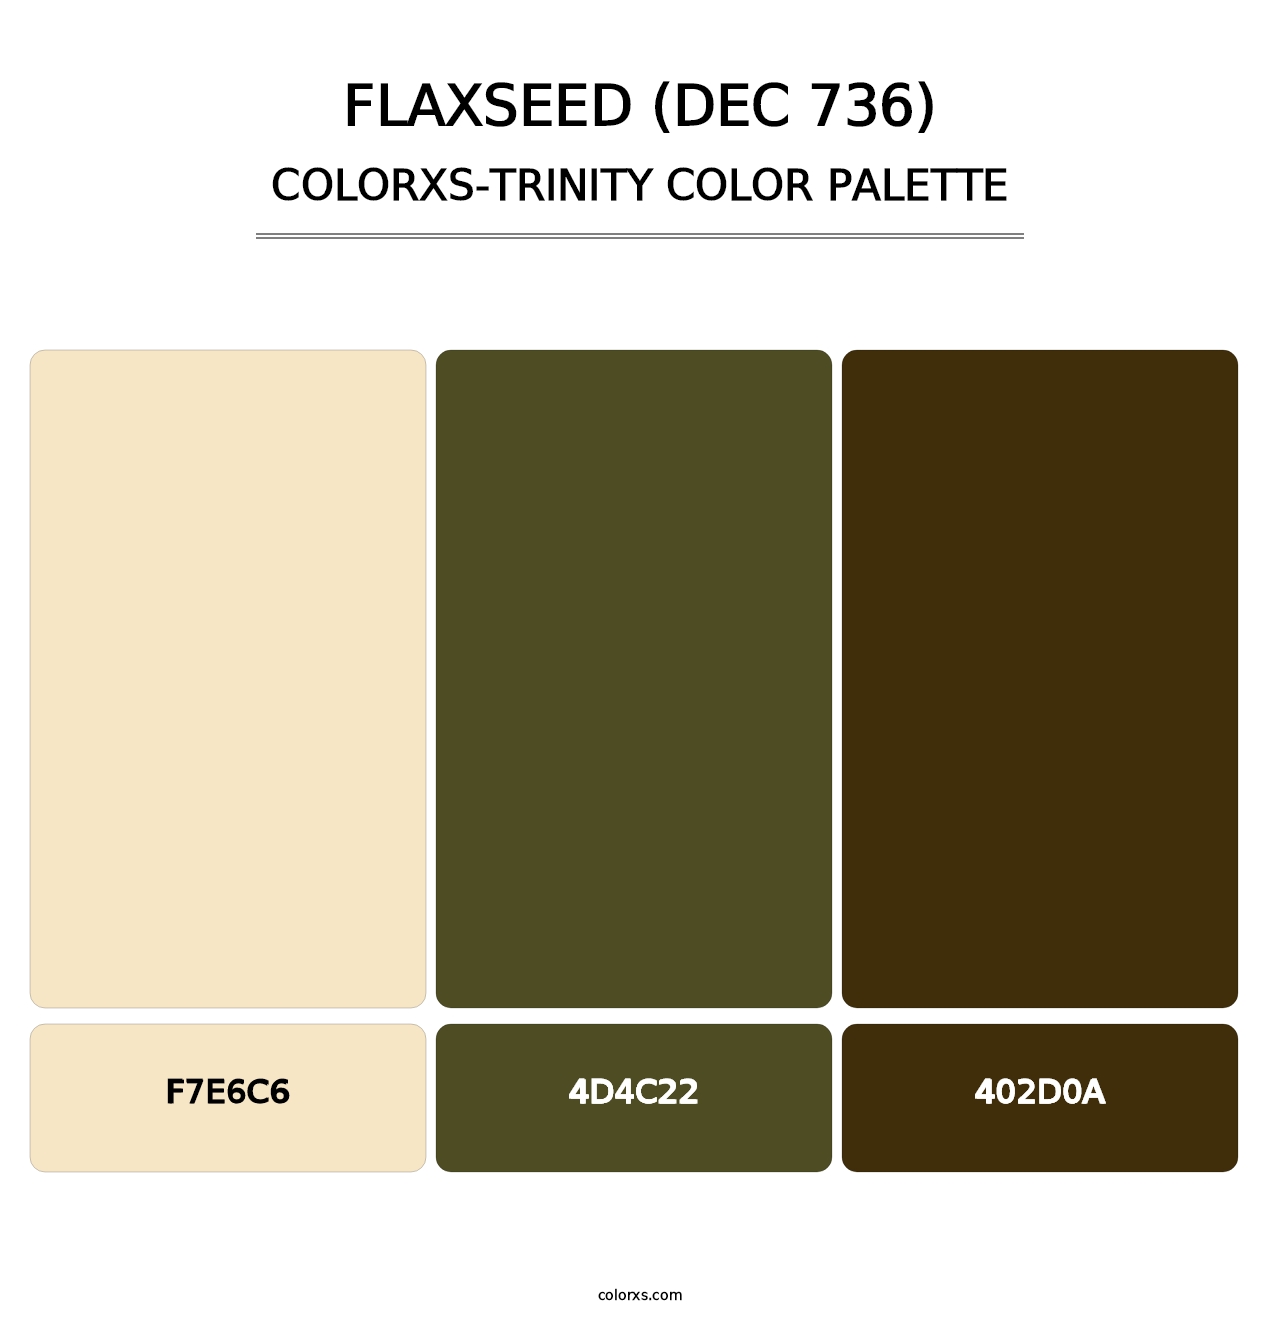 Flaxseed (DEC 736) - Colorxs Trinity Palette